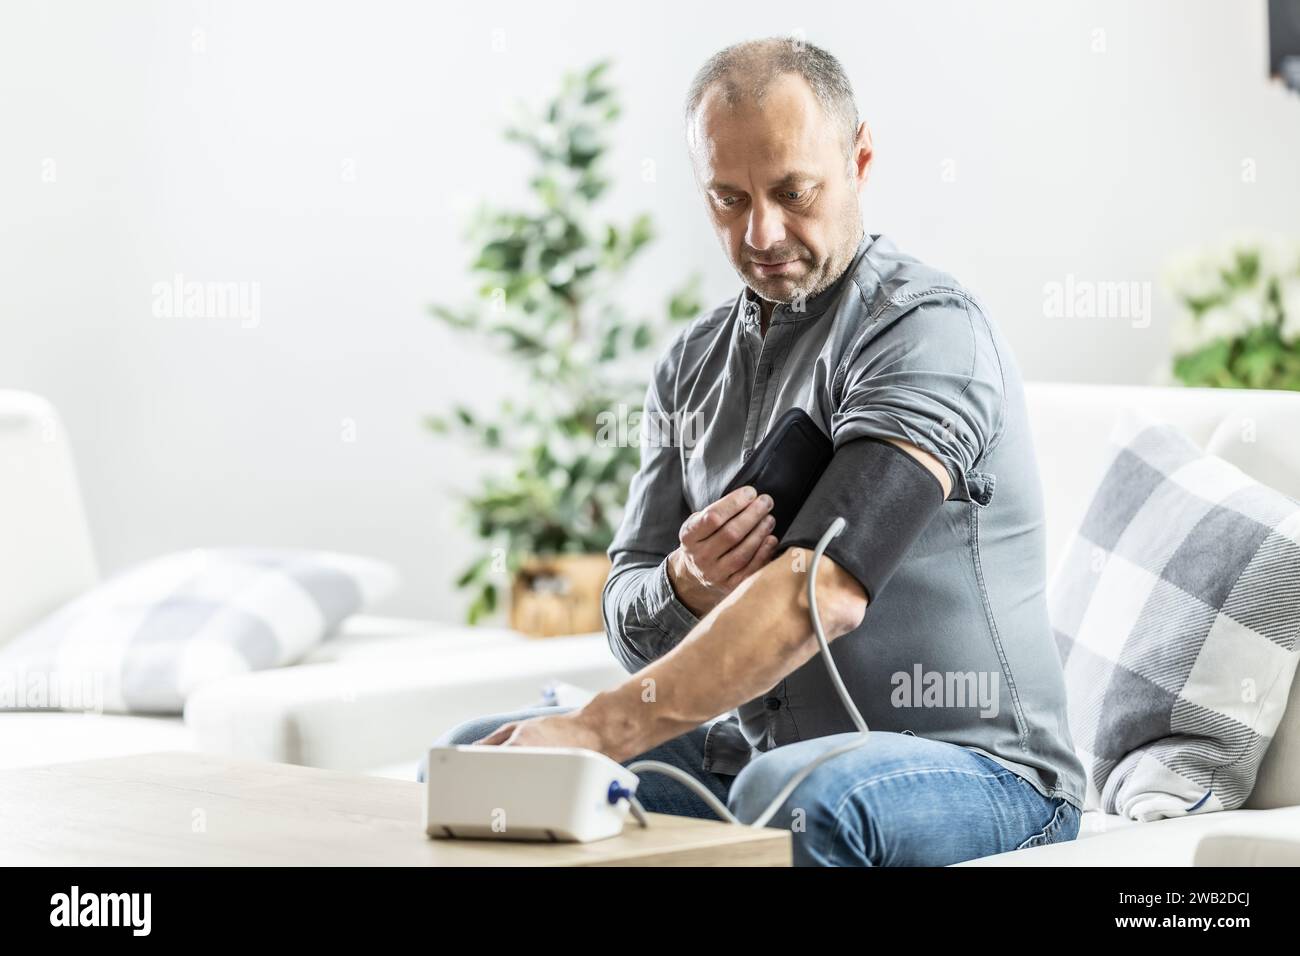 A mature man checking his blood pressure with a digital blood pressure monitor at home. Stock Photo